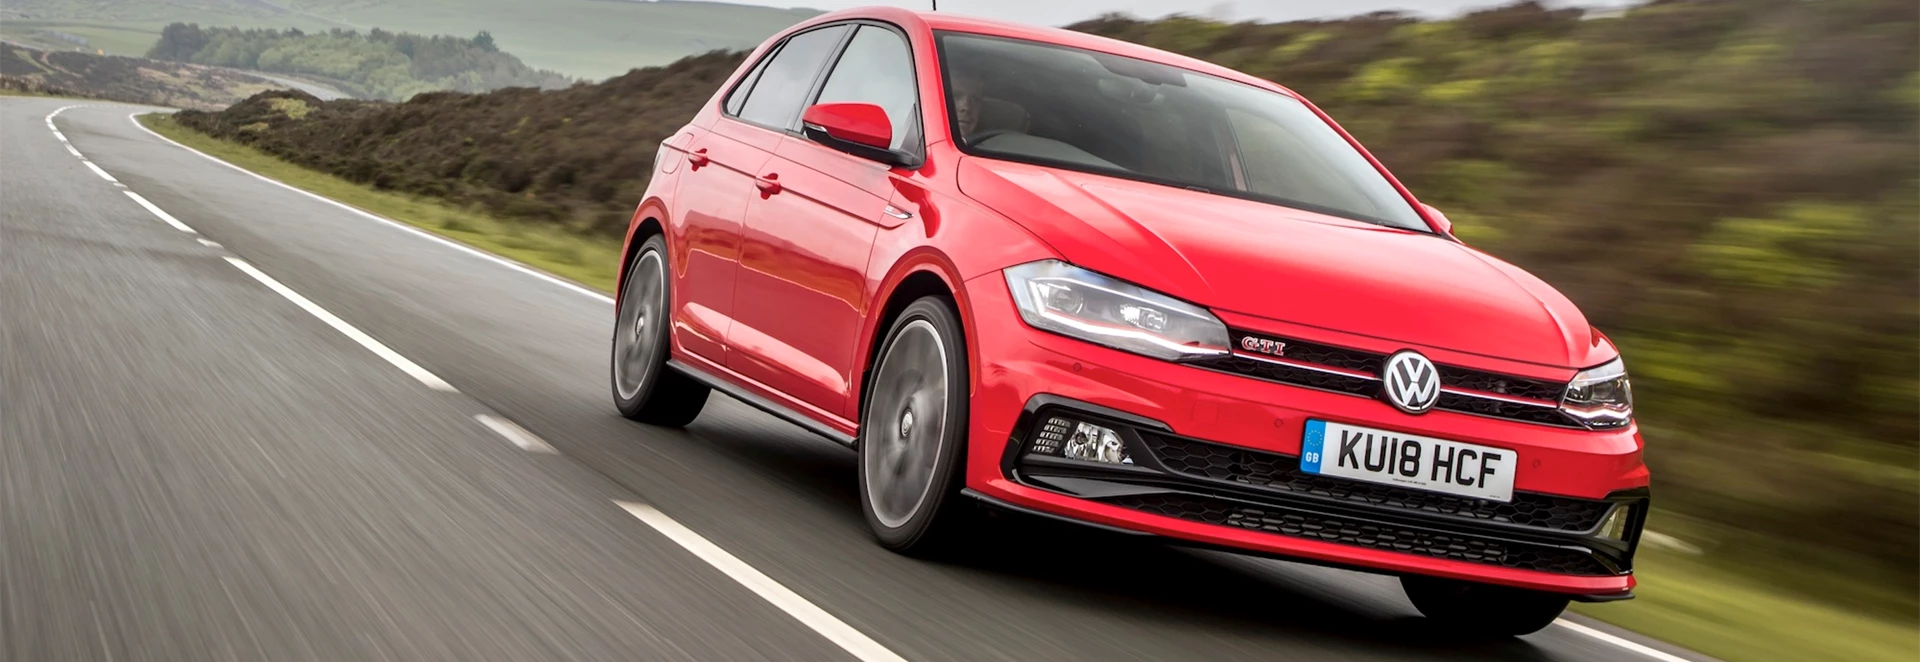 2018 Volkswagen Polo GTI – Loaded with top level features